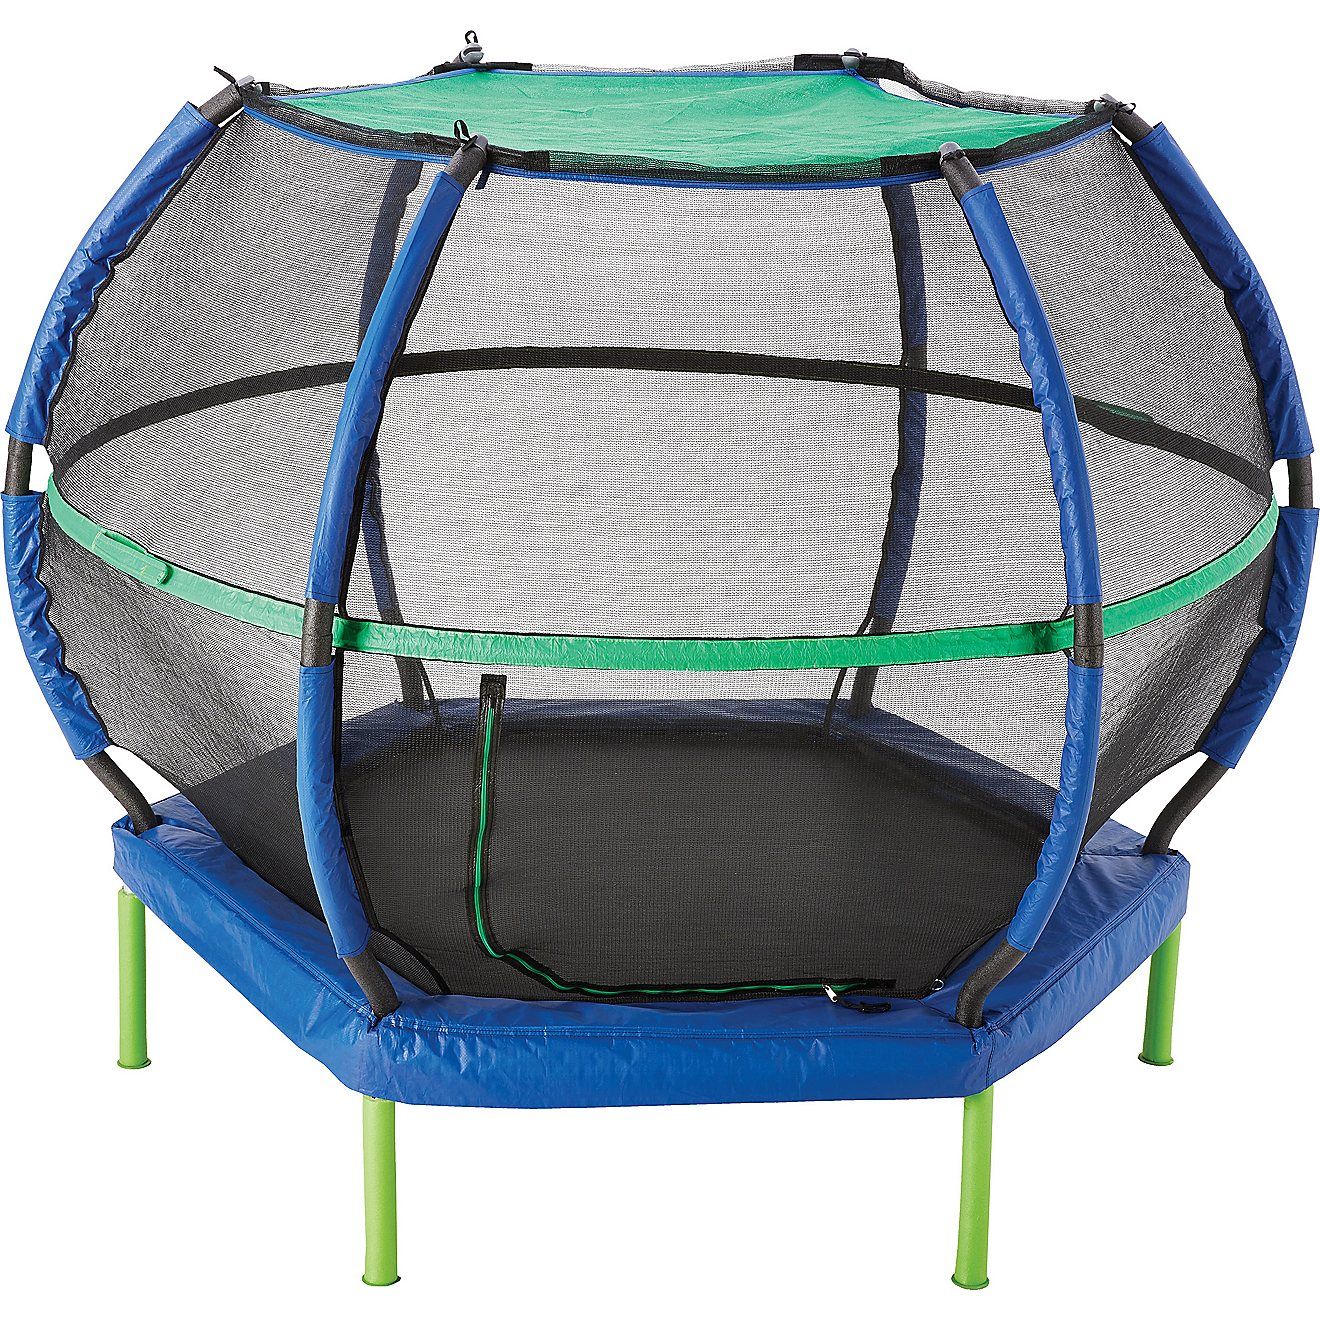 AGame Sunshade 7 ft Trampoline | Academy | Academy Sports + Outdoors